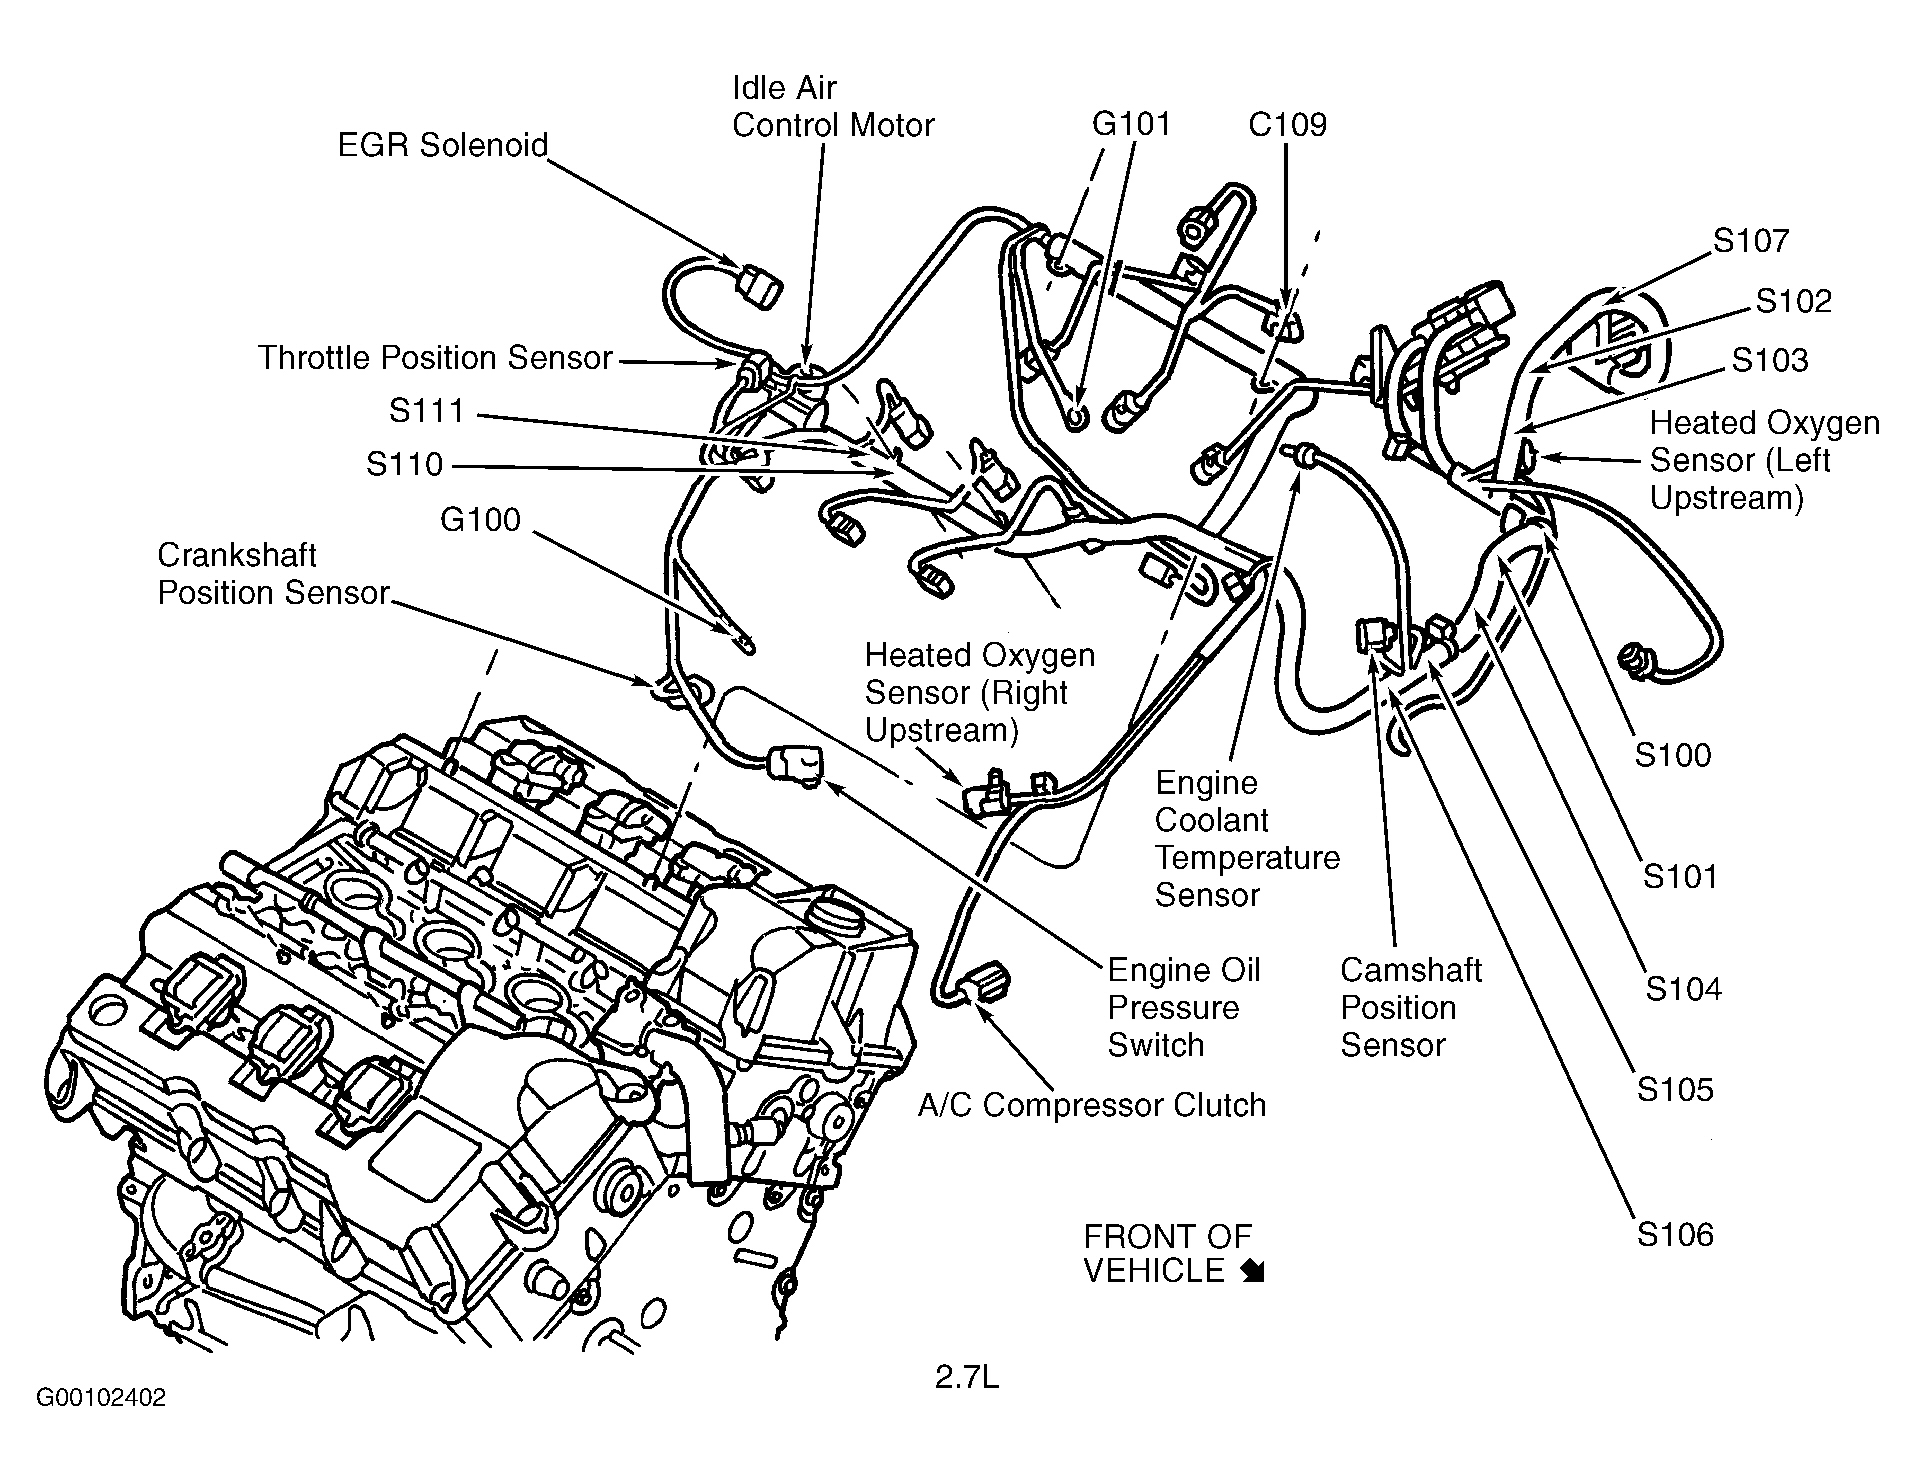 Chrysler Concorde LX 1998 - Component Locations -  Top Of Engine (2.7L)